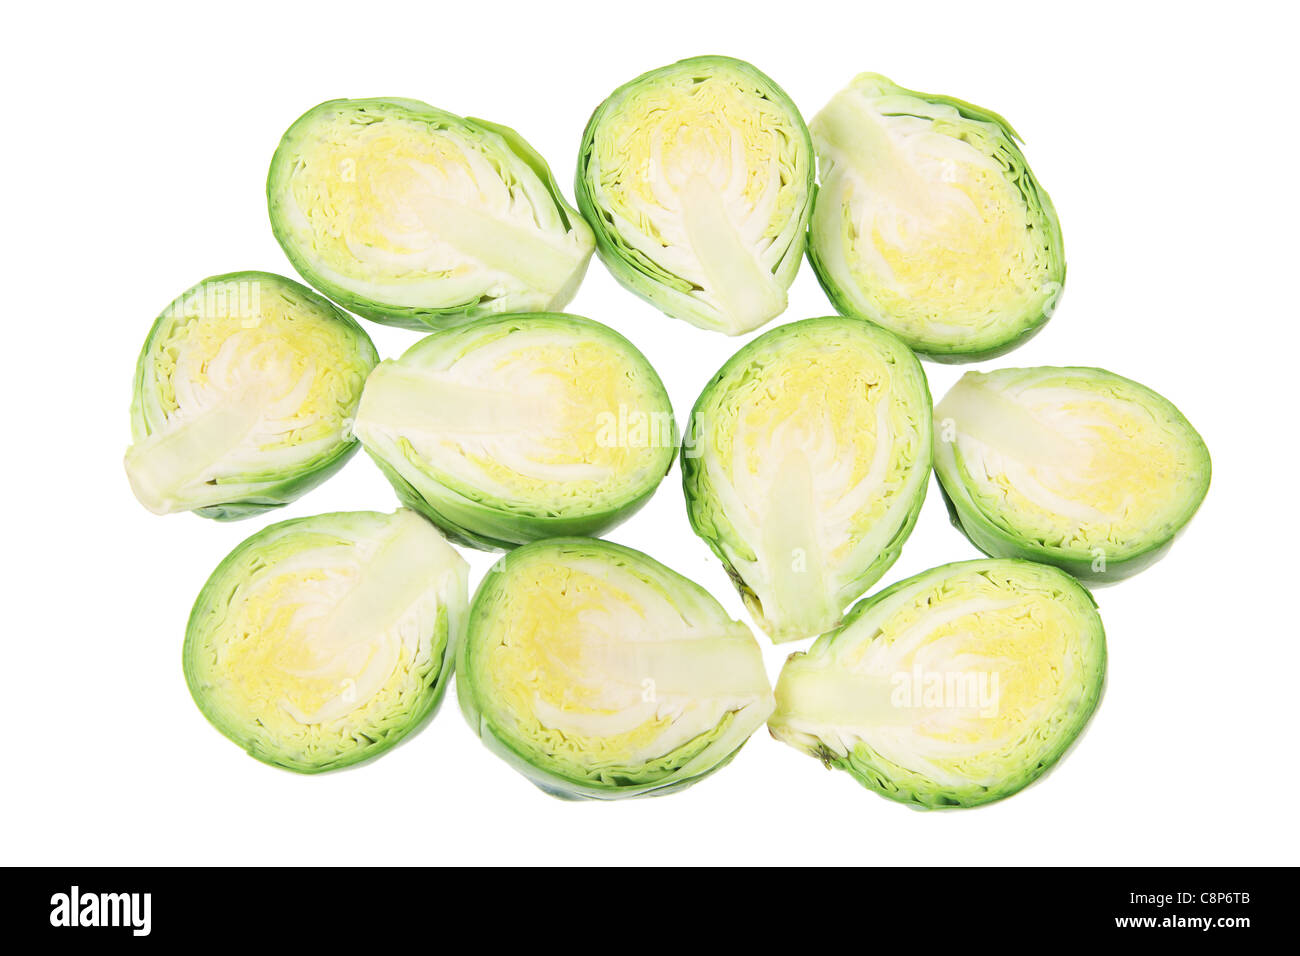 Slices of Brussel Sprouts Stock Photo